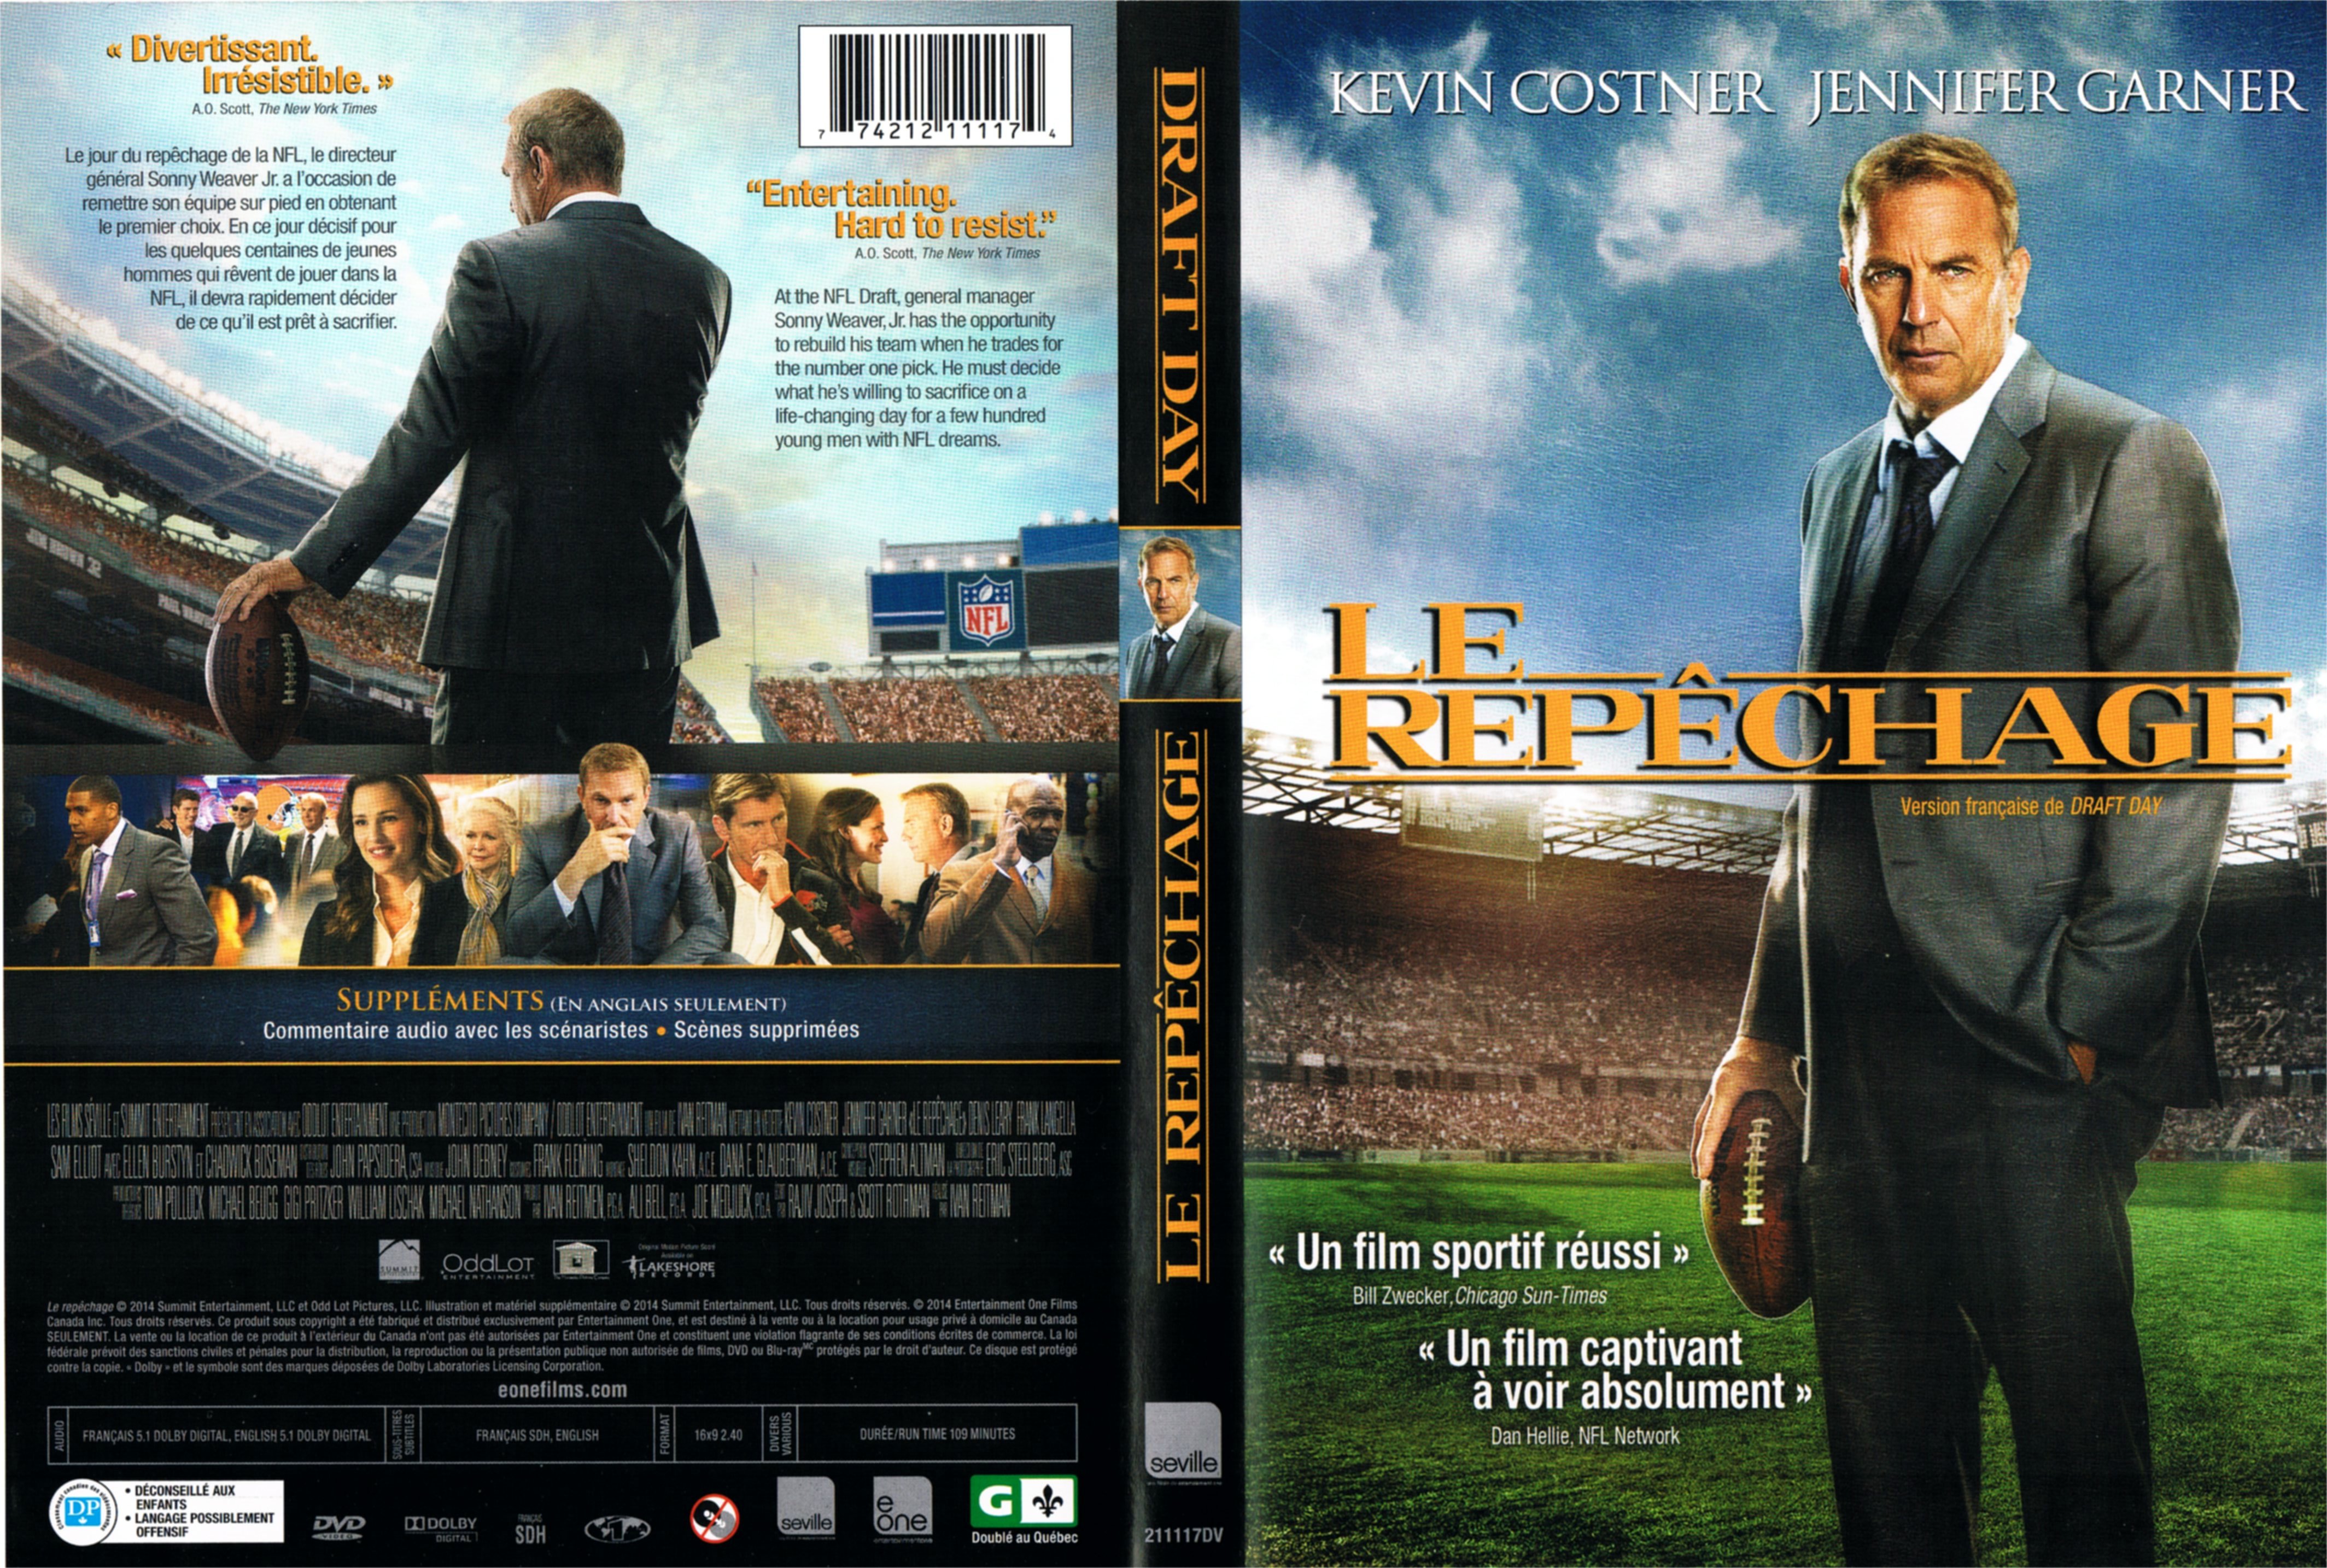 Jaquette DVD Le repechage - Draft Day (Canadienne)